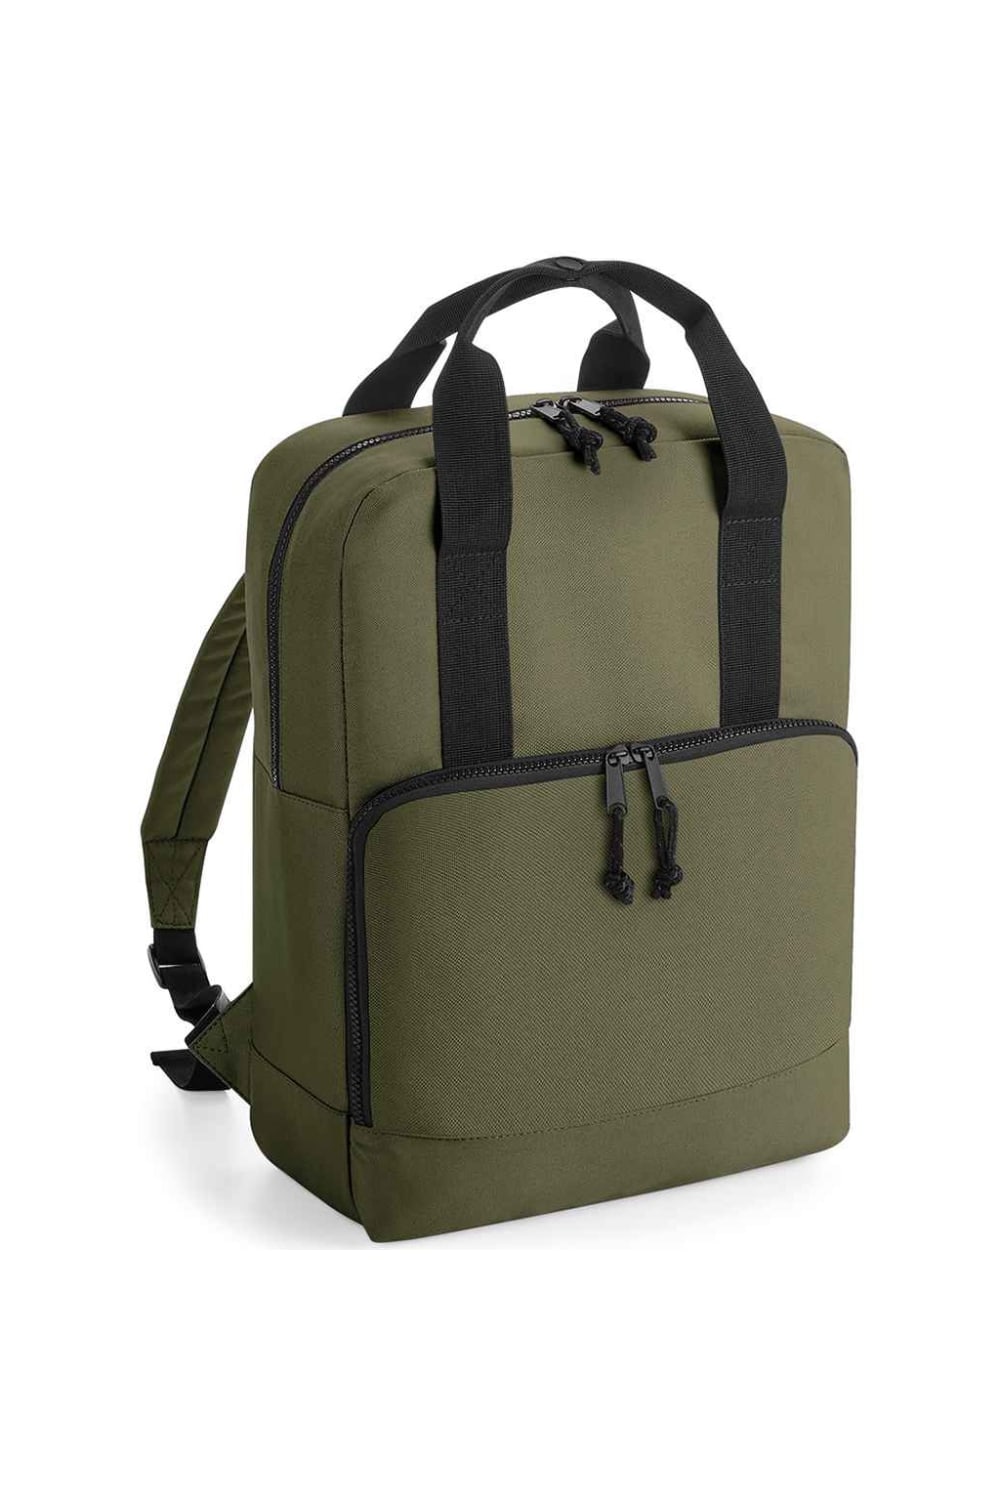 Bagbase Cooler Recycled Backpack (Military Green) (One Size)